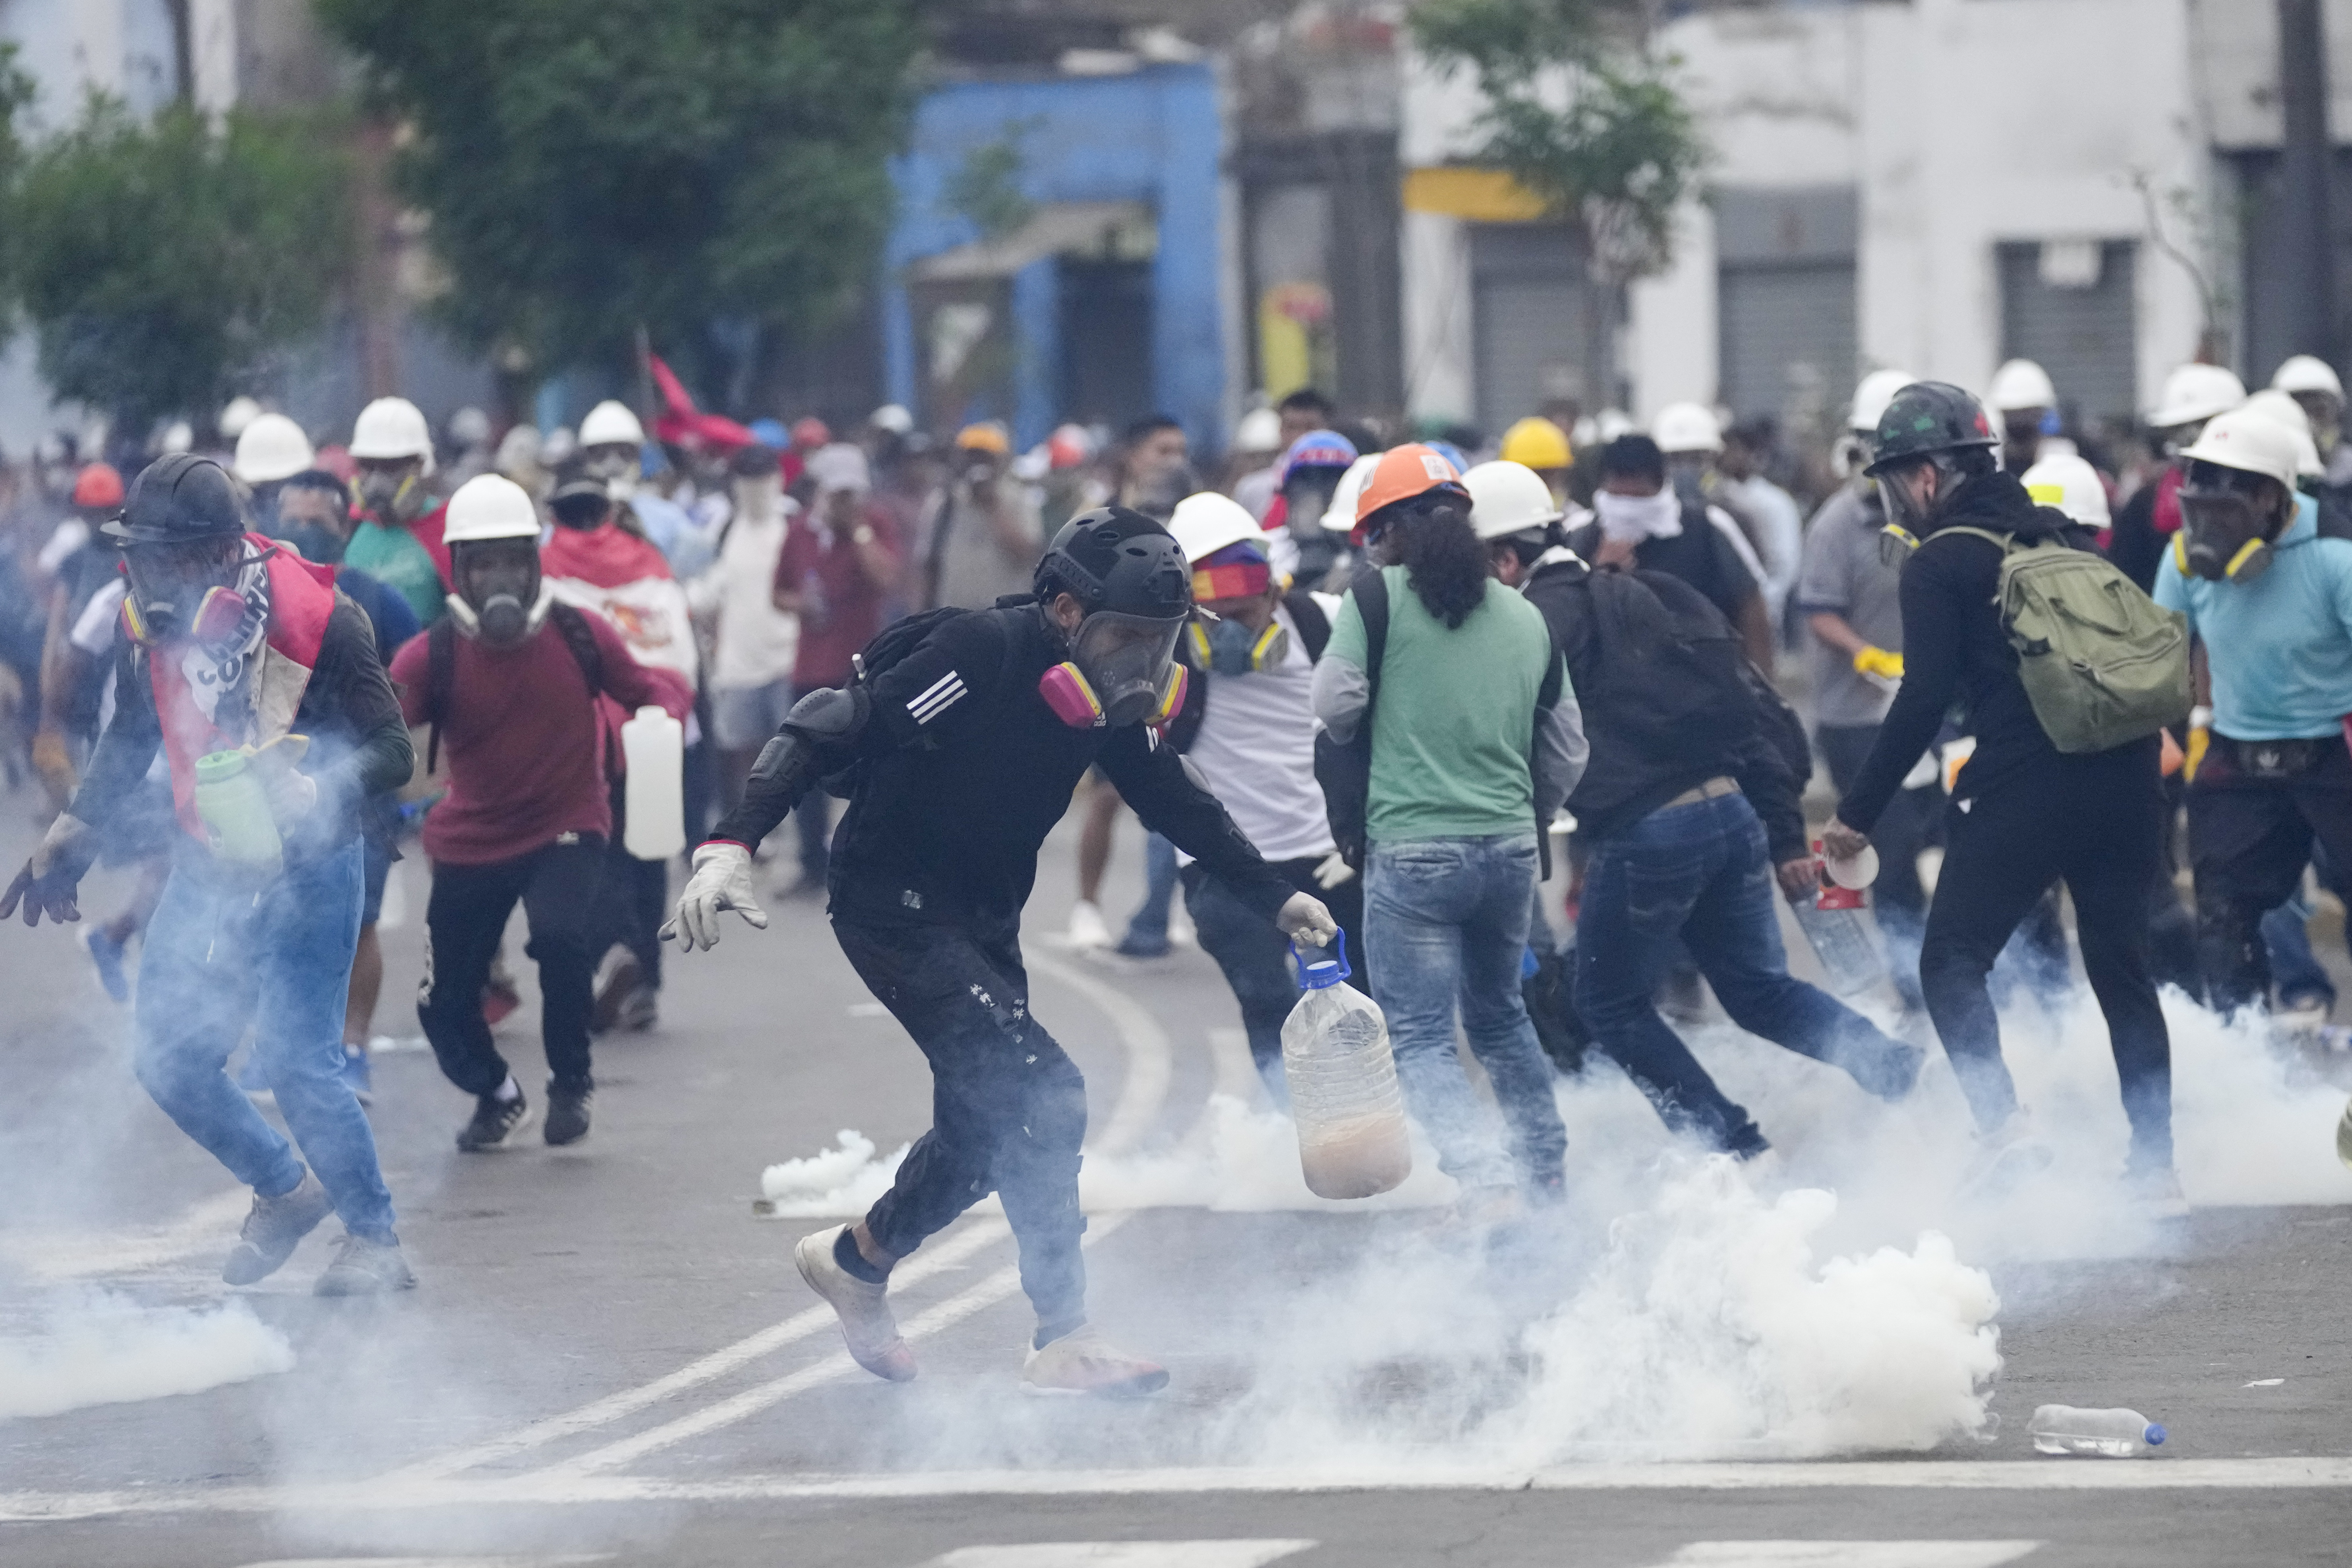 Several anti-government protesters collect tear gas canisters fired at them by the police to dissolve them in Lima, Peru, on Saturday, January 28, 2023. The protesters demand the resignation of President Dina Boluarte and legislators, the advancement of elections, the call to a constituent assembly, justice for those killed in the protests and the freedom of the ousted president Pedro Castillo.  (AP Photo/Guadalupe Pardo)